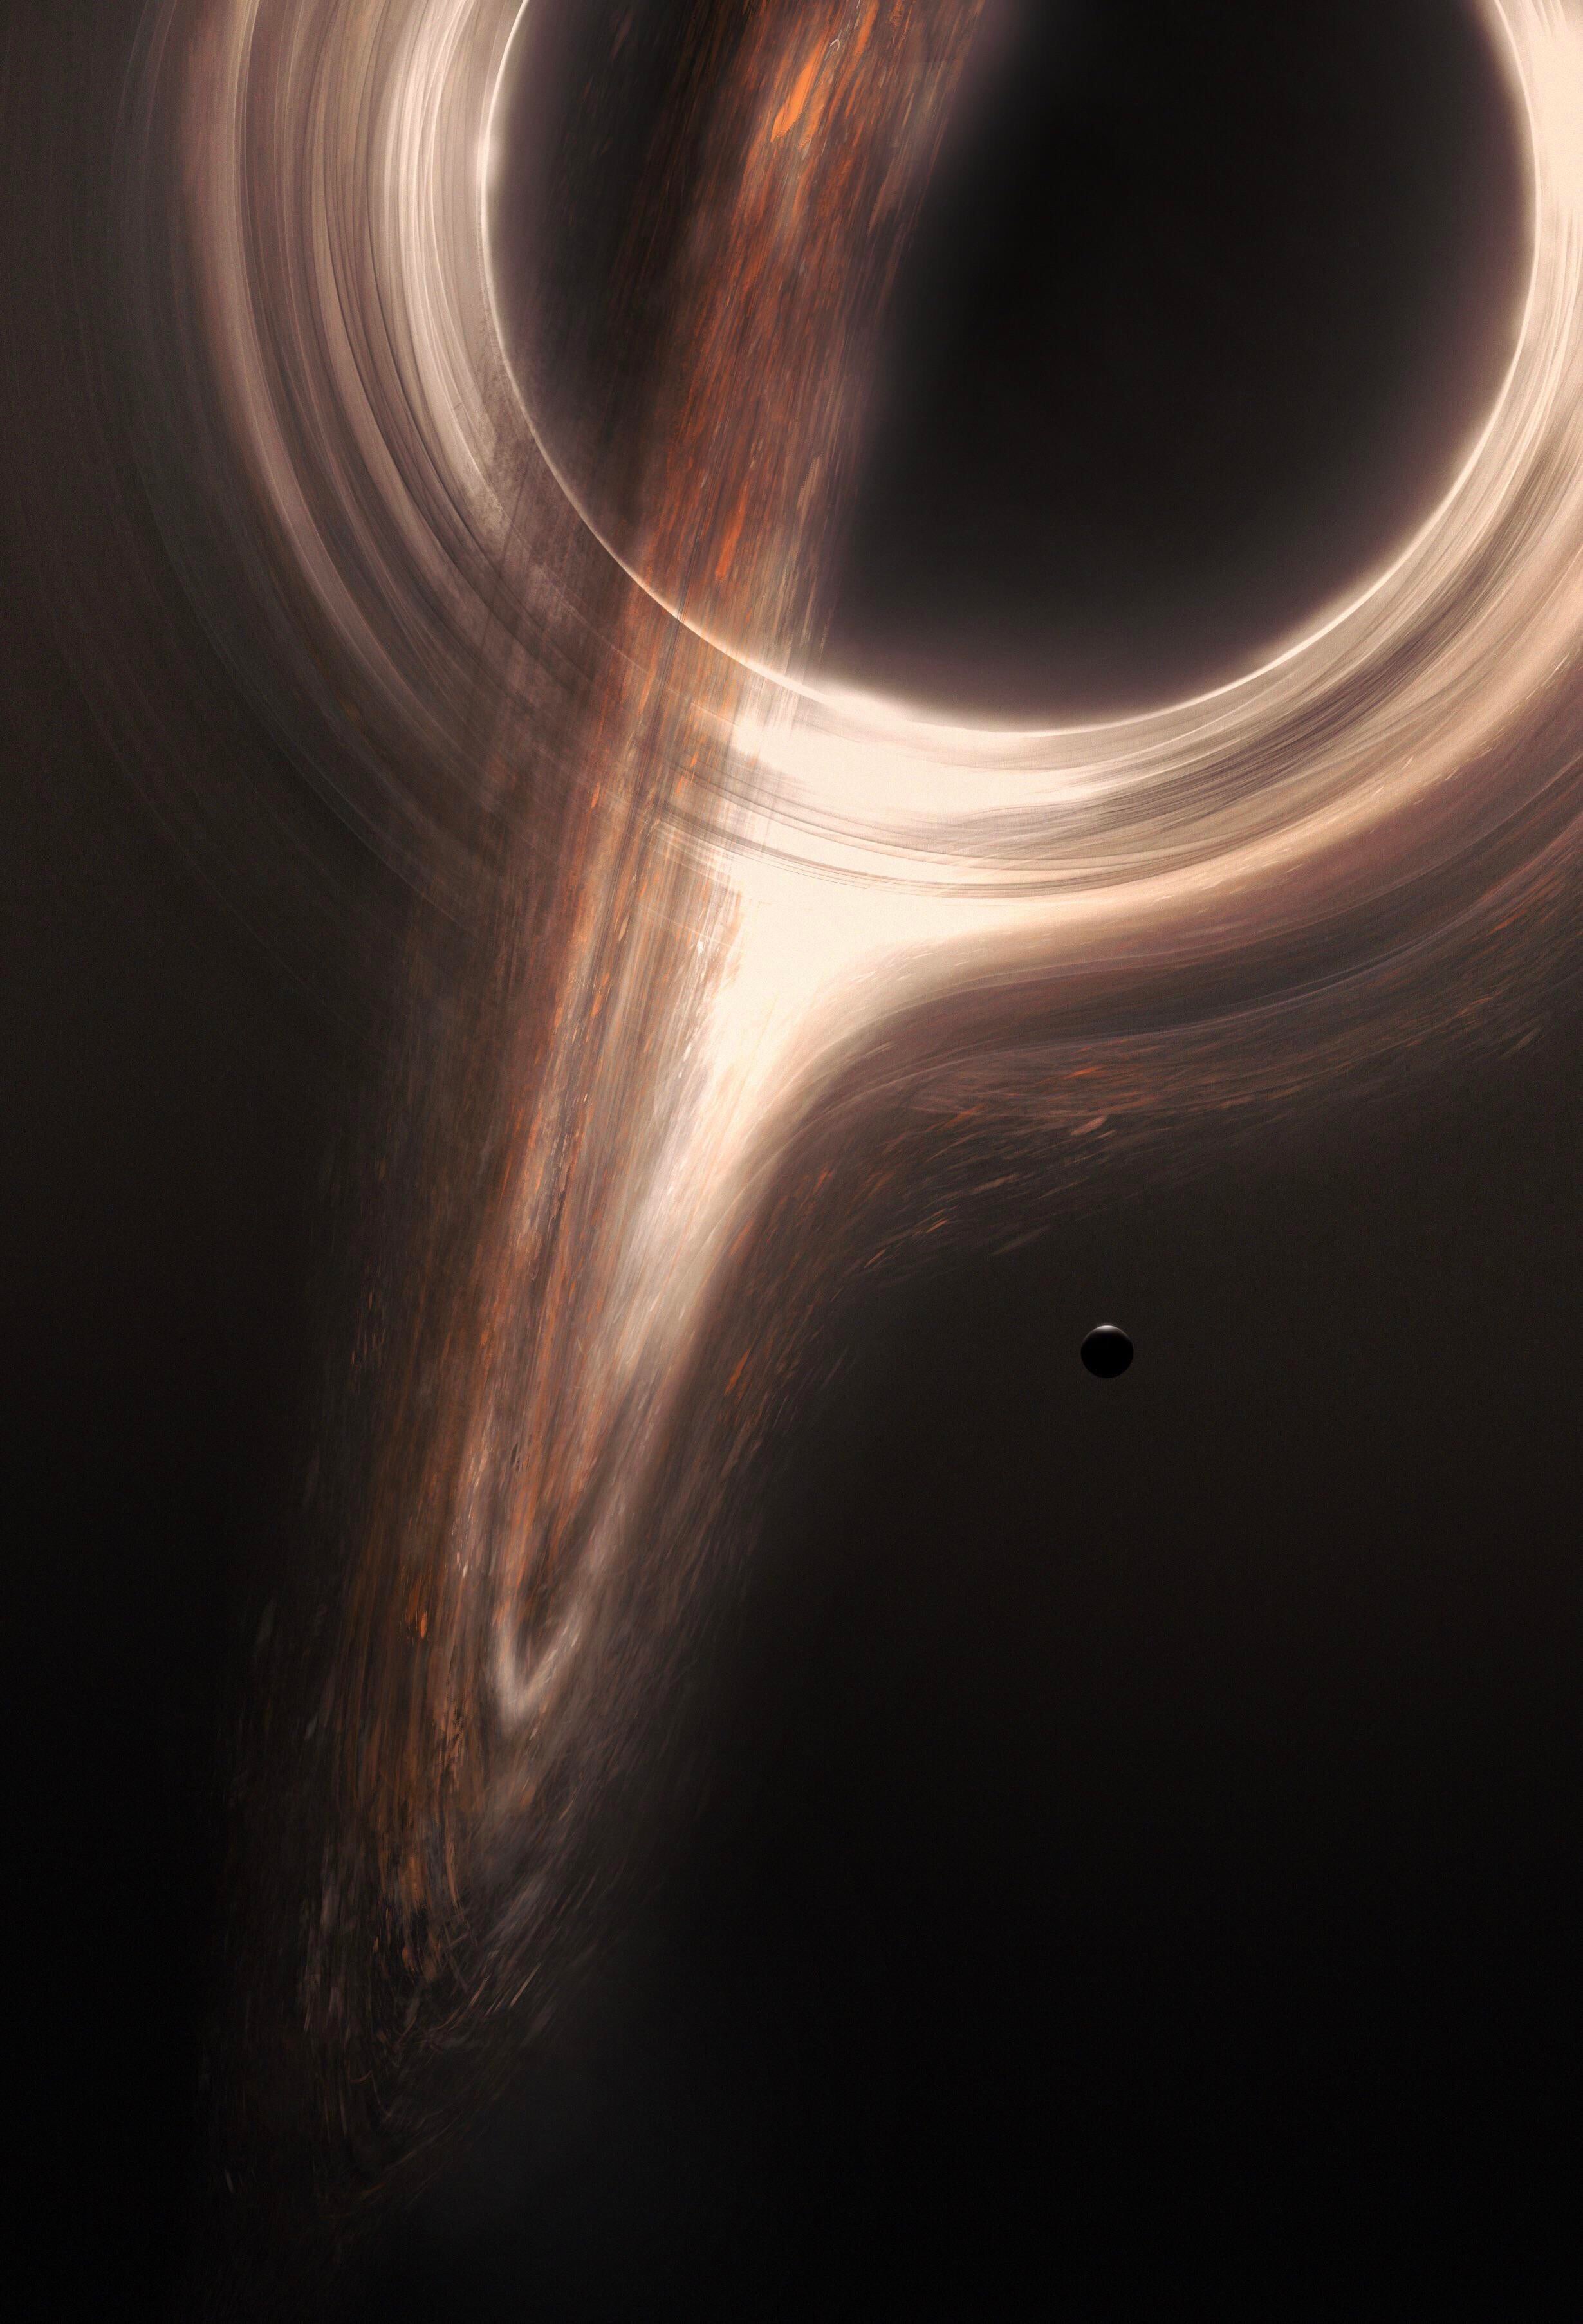 A black hole and a planet next to it from Interstellar